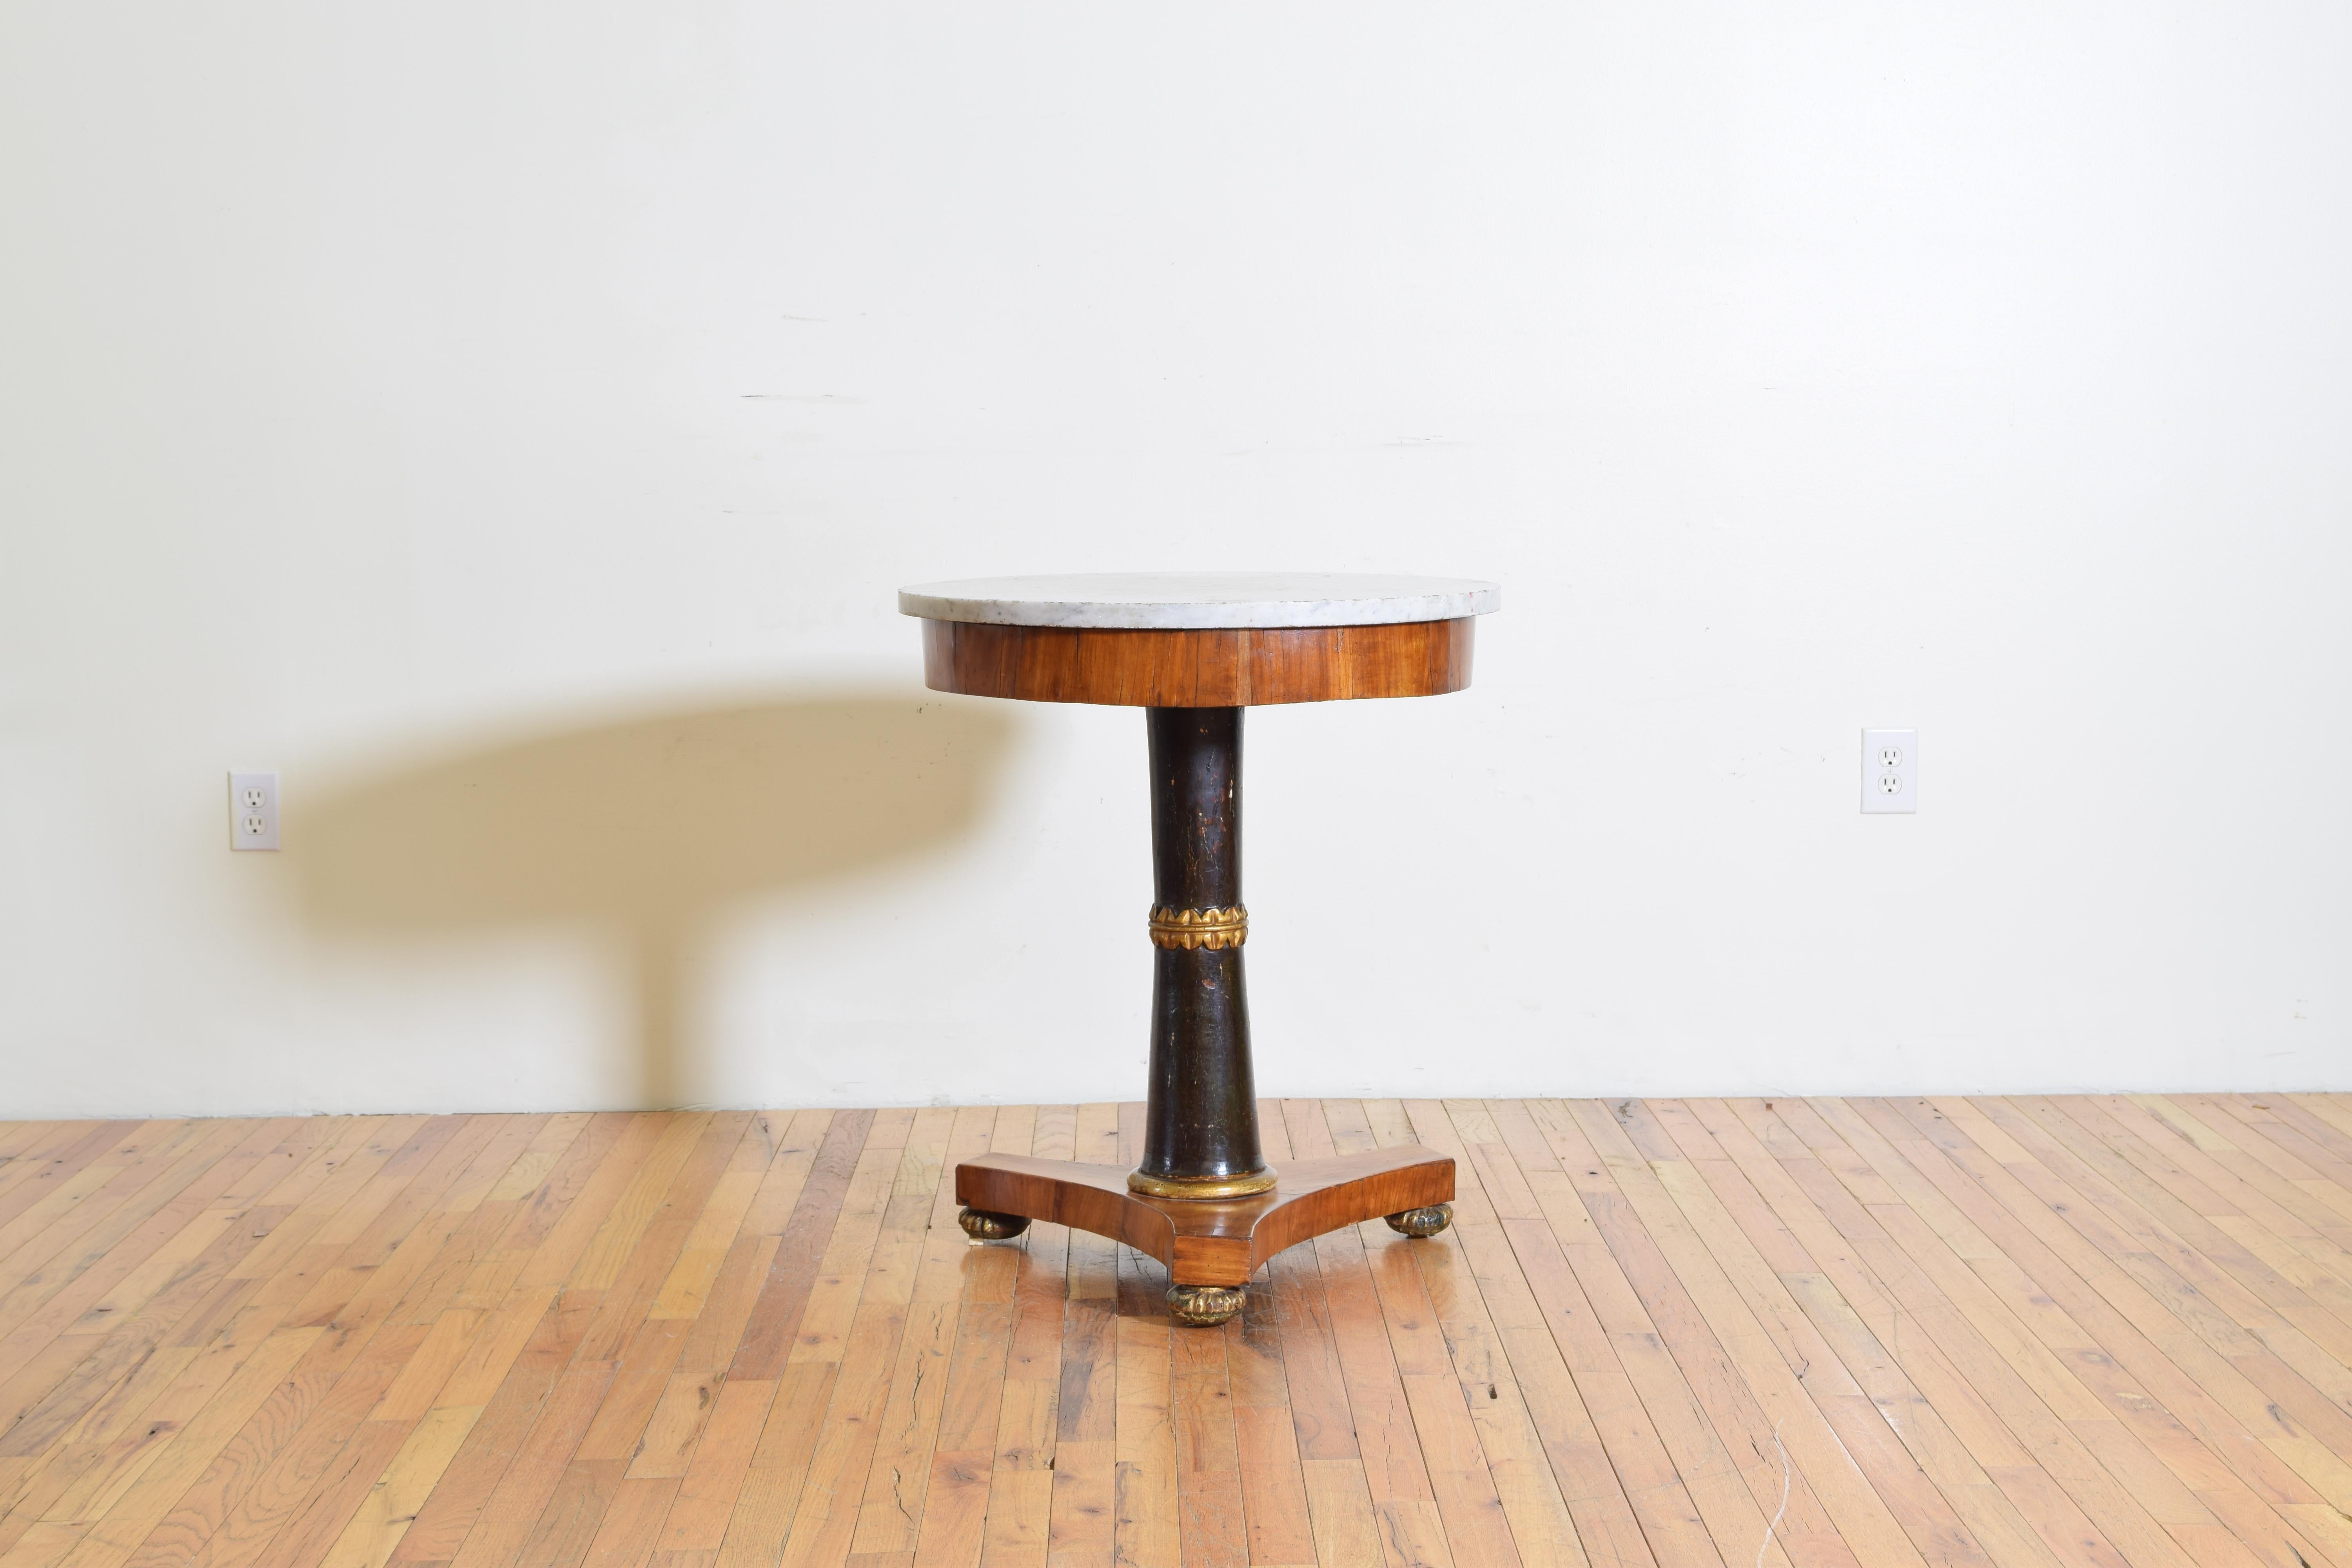 The original marble top above a conforming apron covered in walnut veneer supported by and ebonized columnar standard divided by a carved giltwood decoration, the tripartite walnut veneered base raised on carved and gilded bun feet, circa 1825.